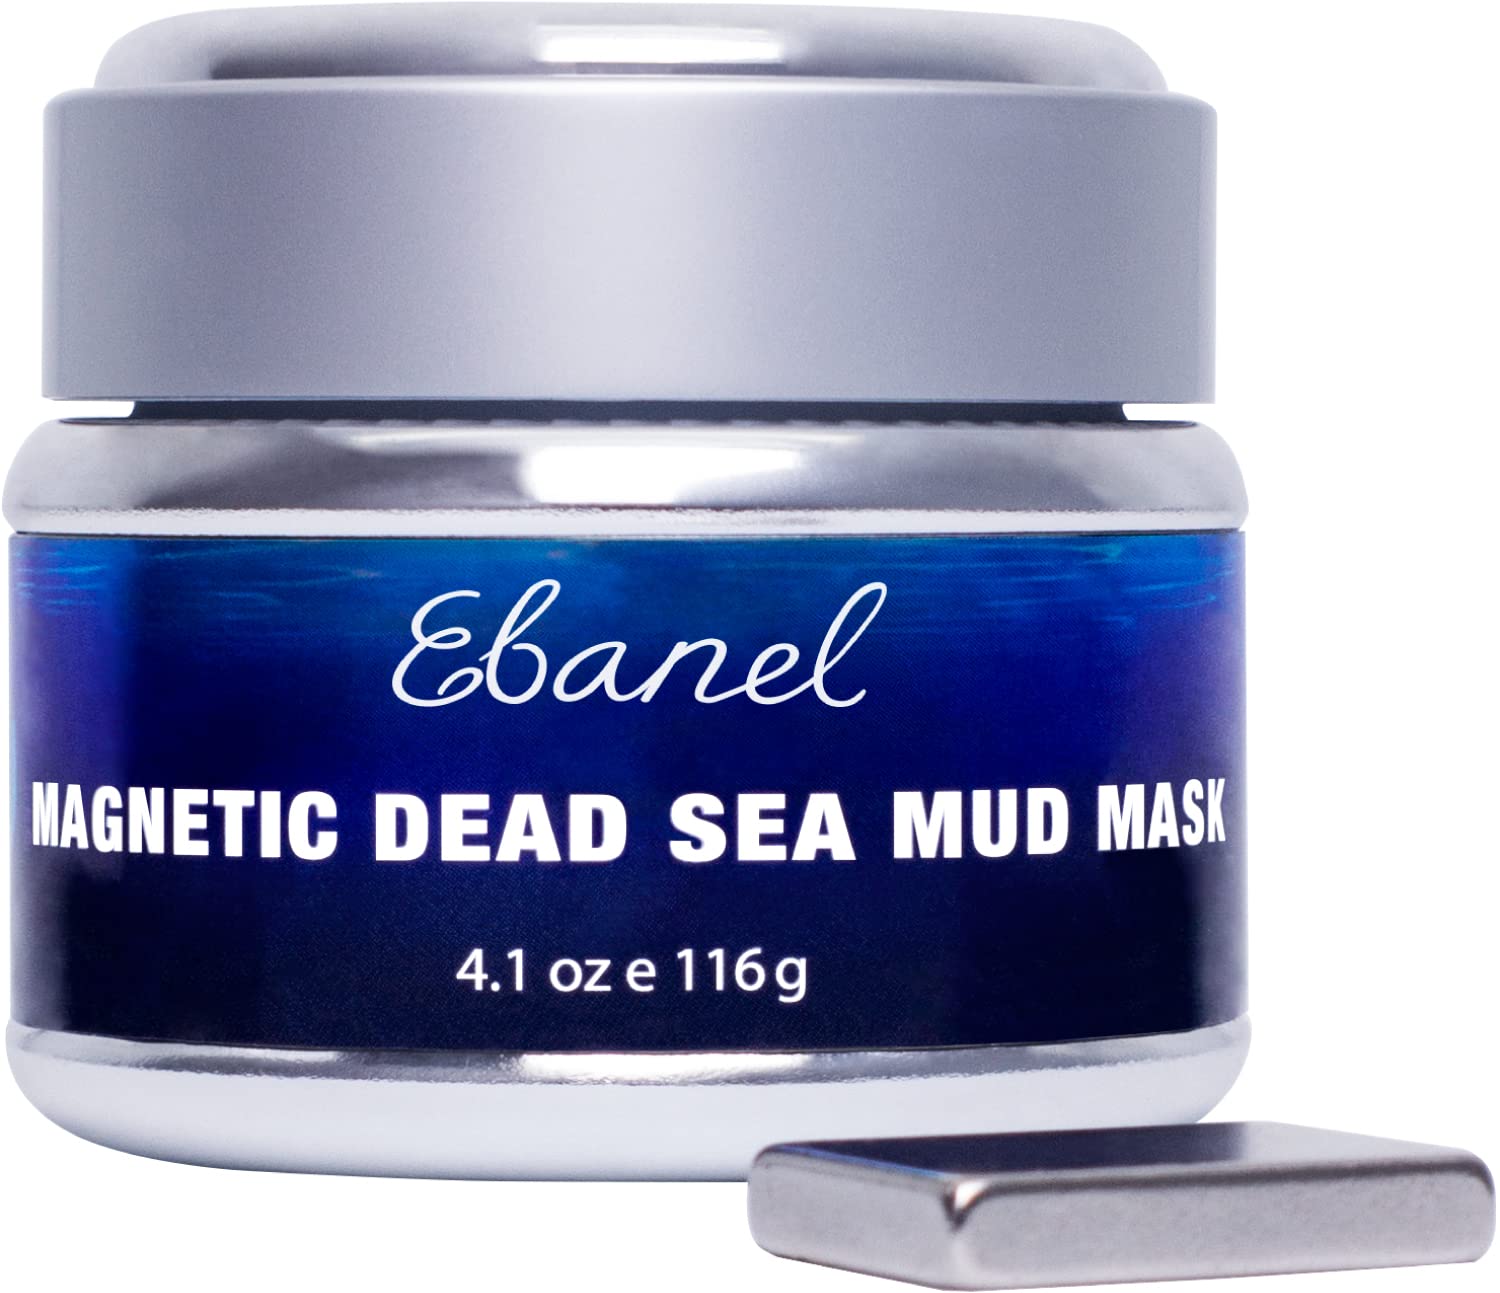 Ebanel Magnetic Dead Sea Mud Mask for Face and Body, 4.1 Oz Deep Pore Cleansing Moisturizing Bentonite Clay Detox Face Mask for Acne, Blackheads with Retinol, Rosehip, Avocado Oil, Argan Oil, Peptide